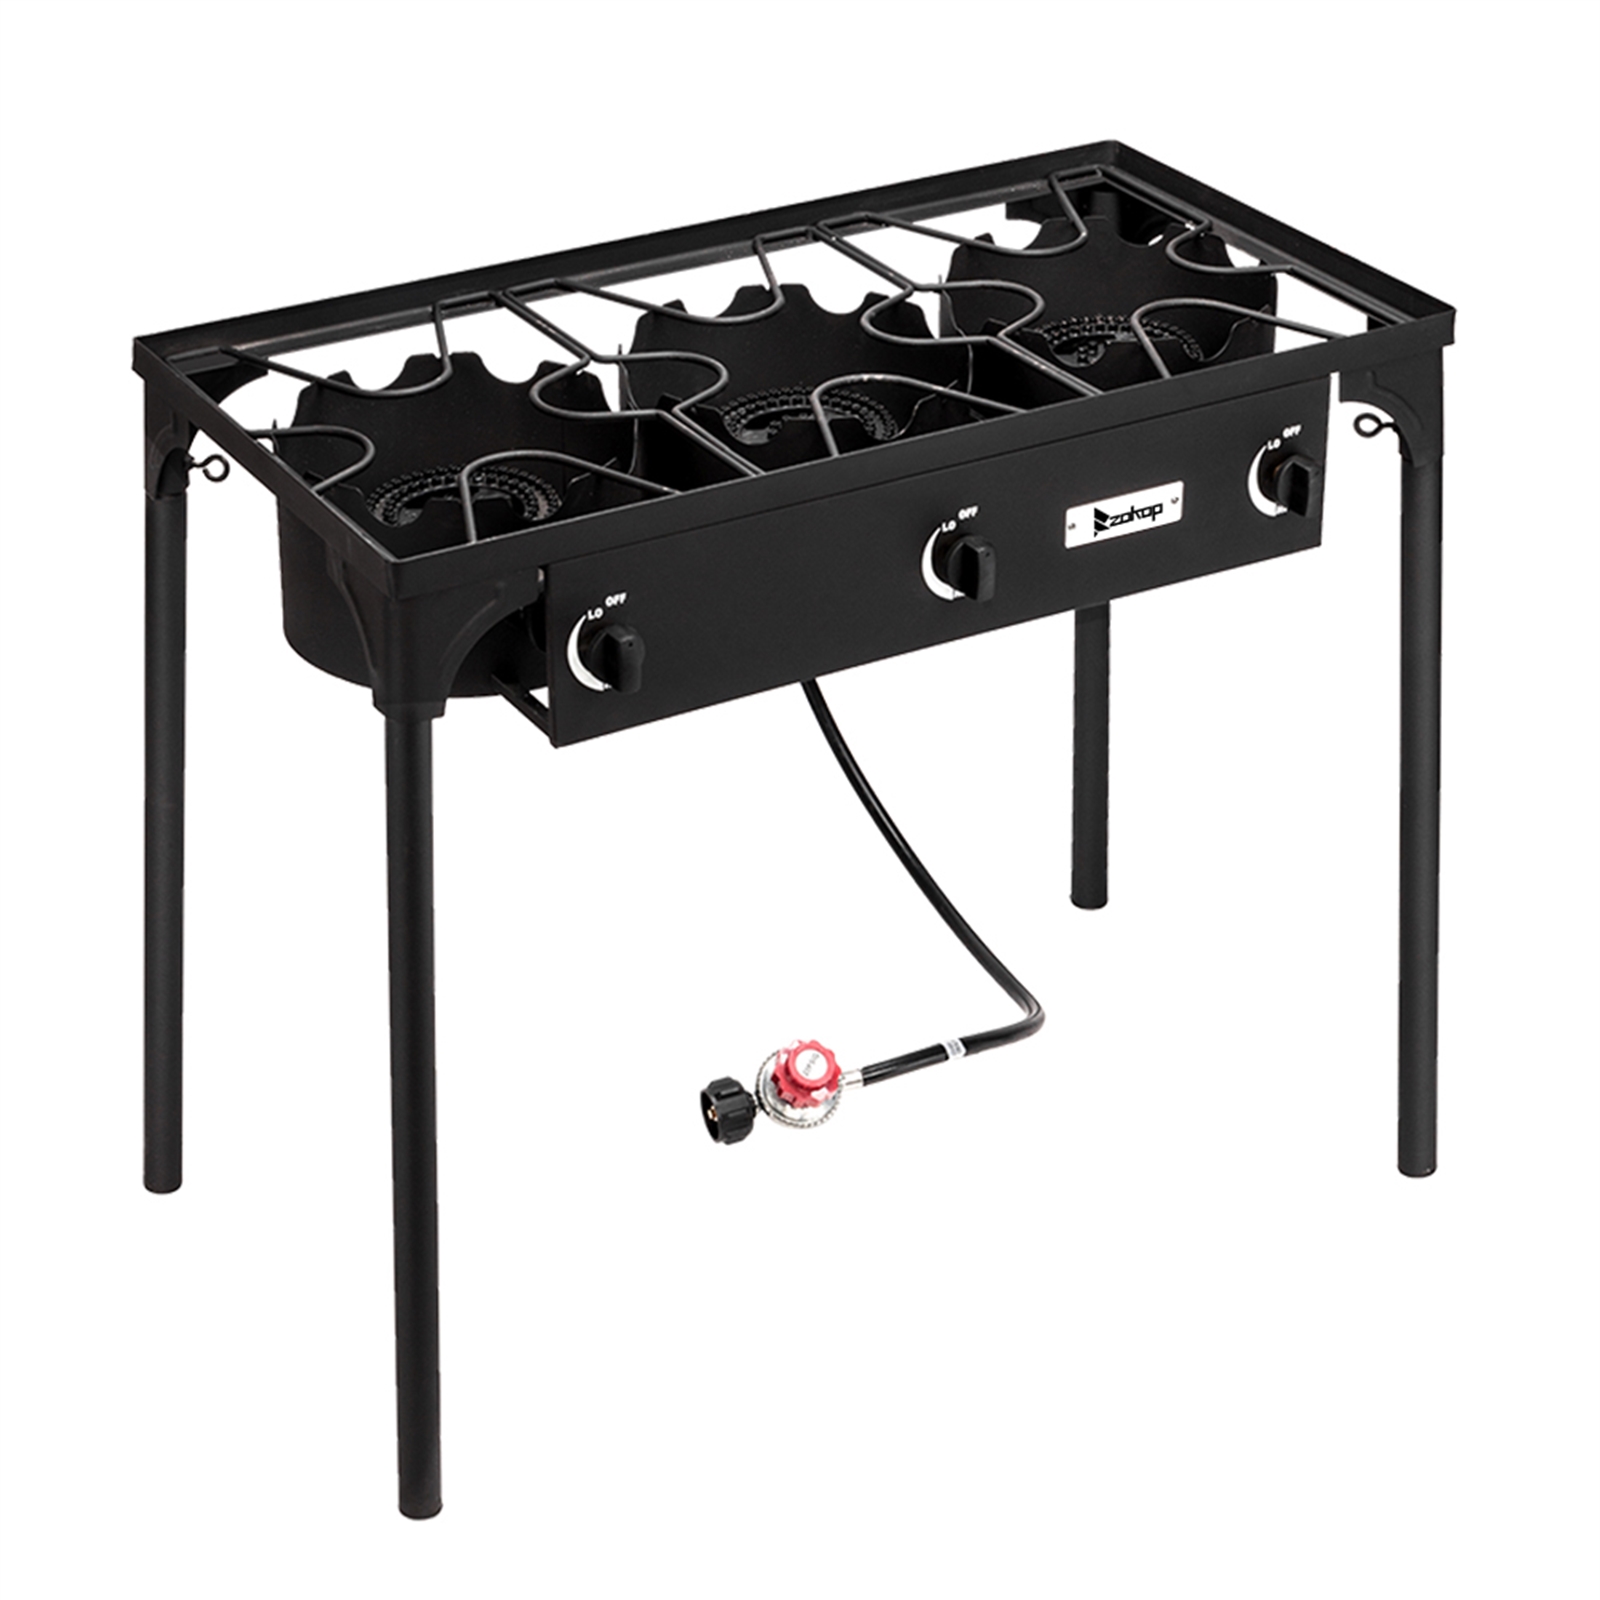 Outdoor Camp Stove, Three Burner Stove, 225, 000 BTU Portable High Pressure Propane-Powered Cooktop with Removable Legs, Portable Cast Iron Patio Cooking Burner Gas Cooker - image 5 of 9